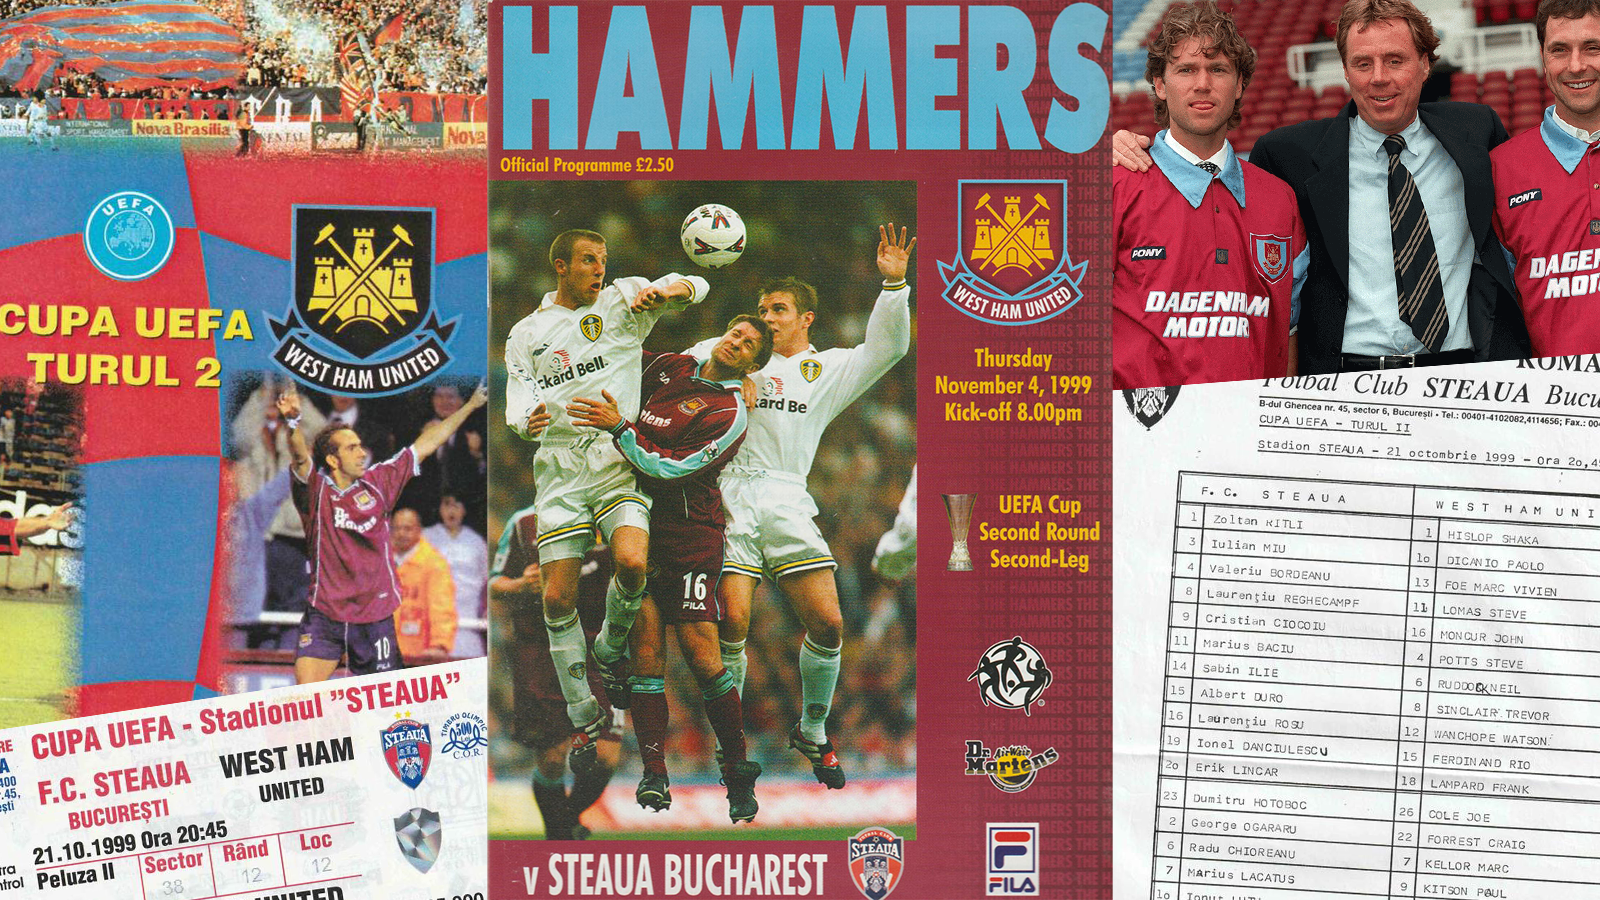 Reflecting on over 40 years of links between West Ham United and the country tonight’s visitors FCSB hail from